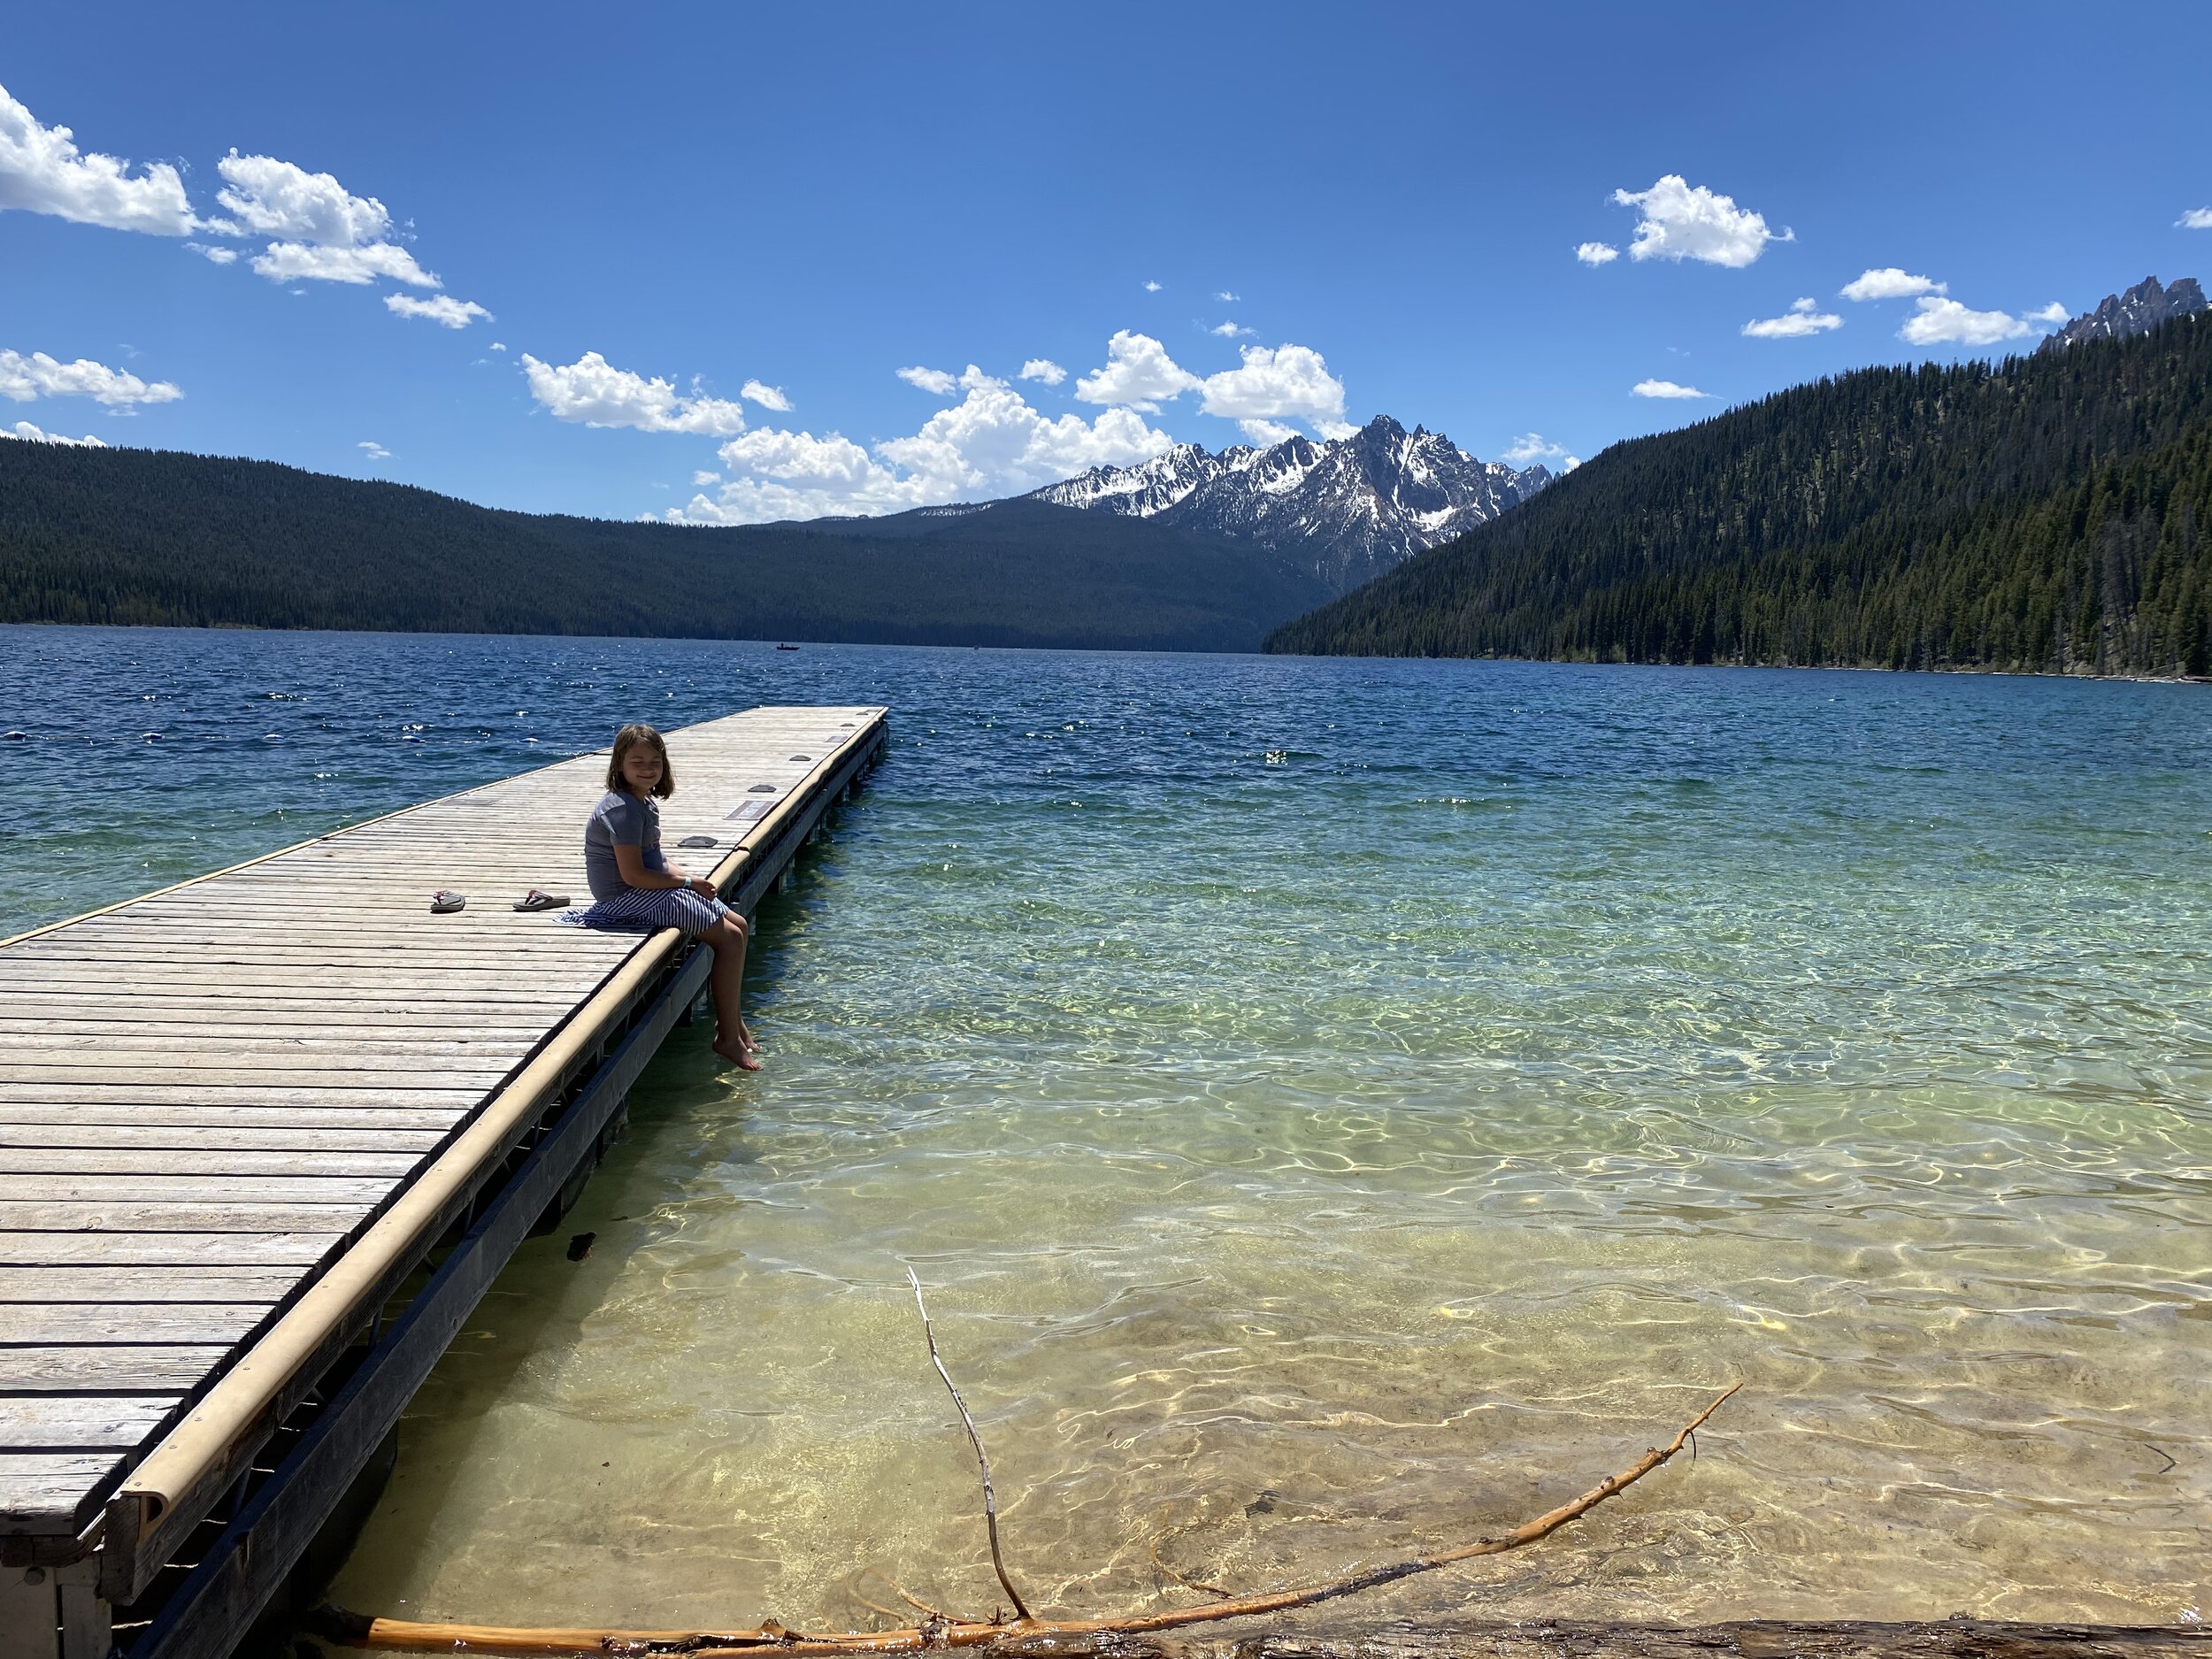 Bunny dips her toes in the crystal clear waters of Redfish Lake.  Photo by Karen Boudreaux, June 3, 2021